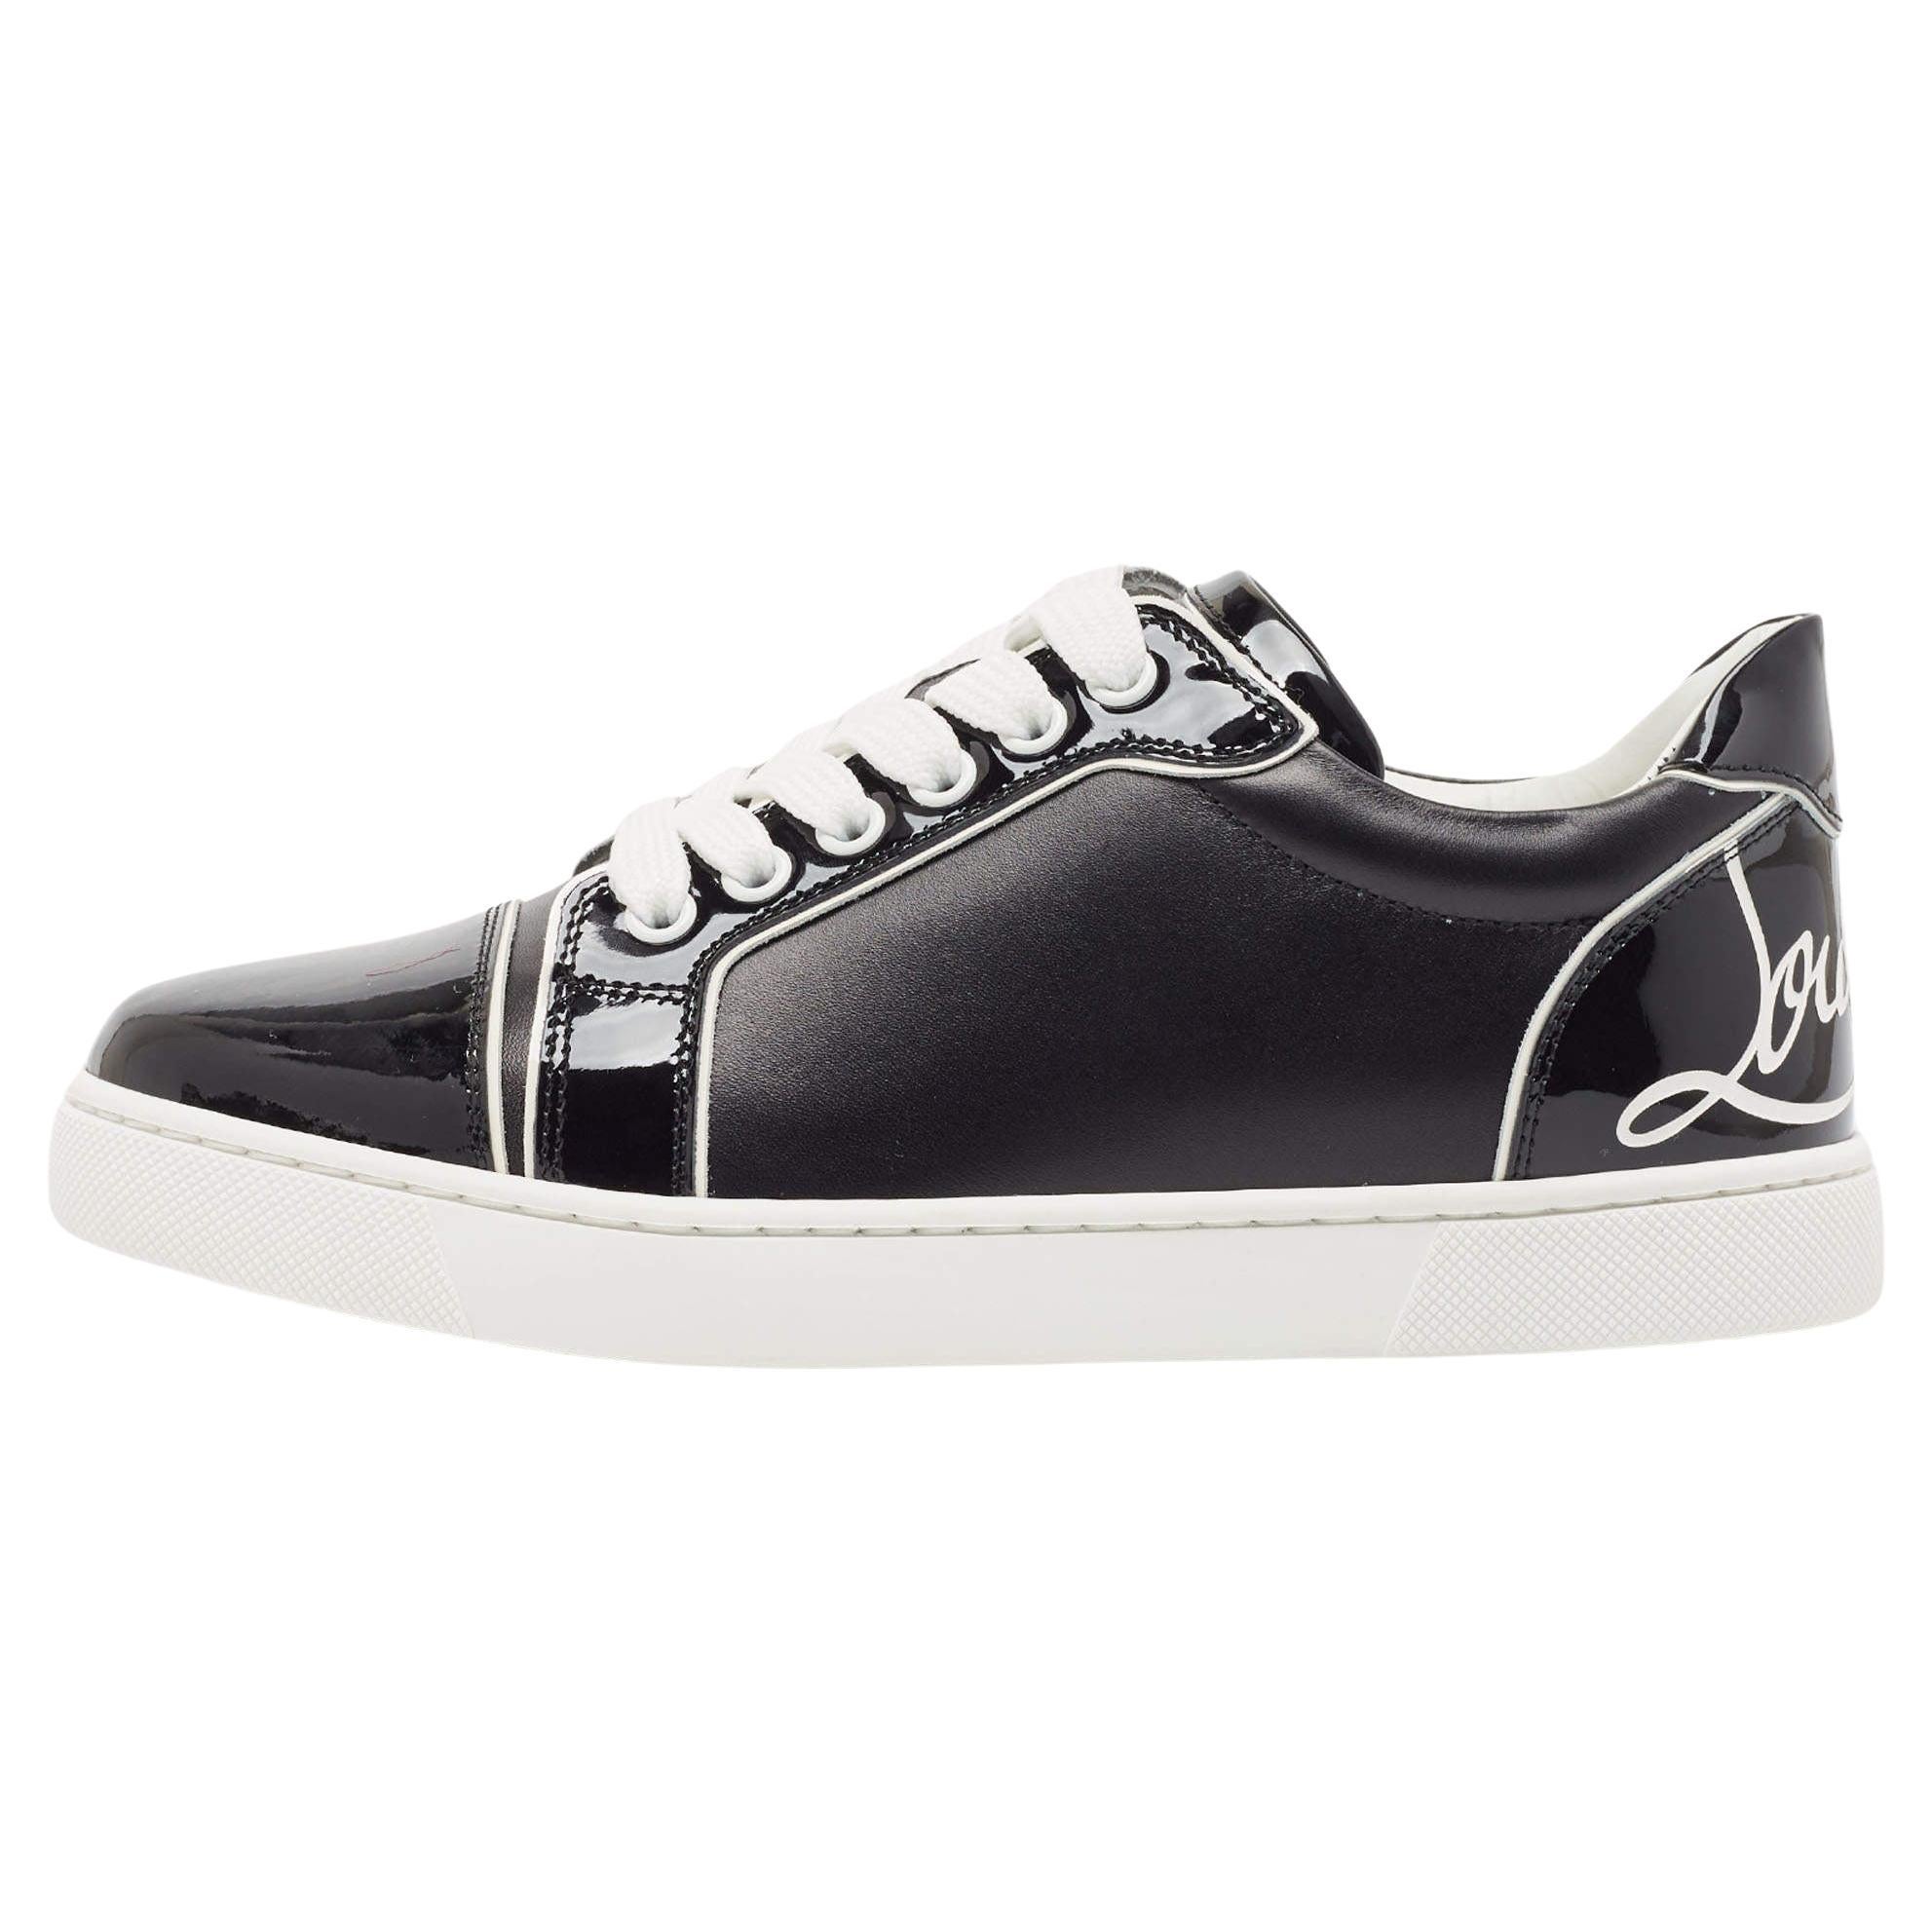 Christian Louboutin Black Patent and Leather Low Top Sneakers Size 36 For Sale